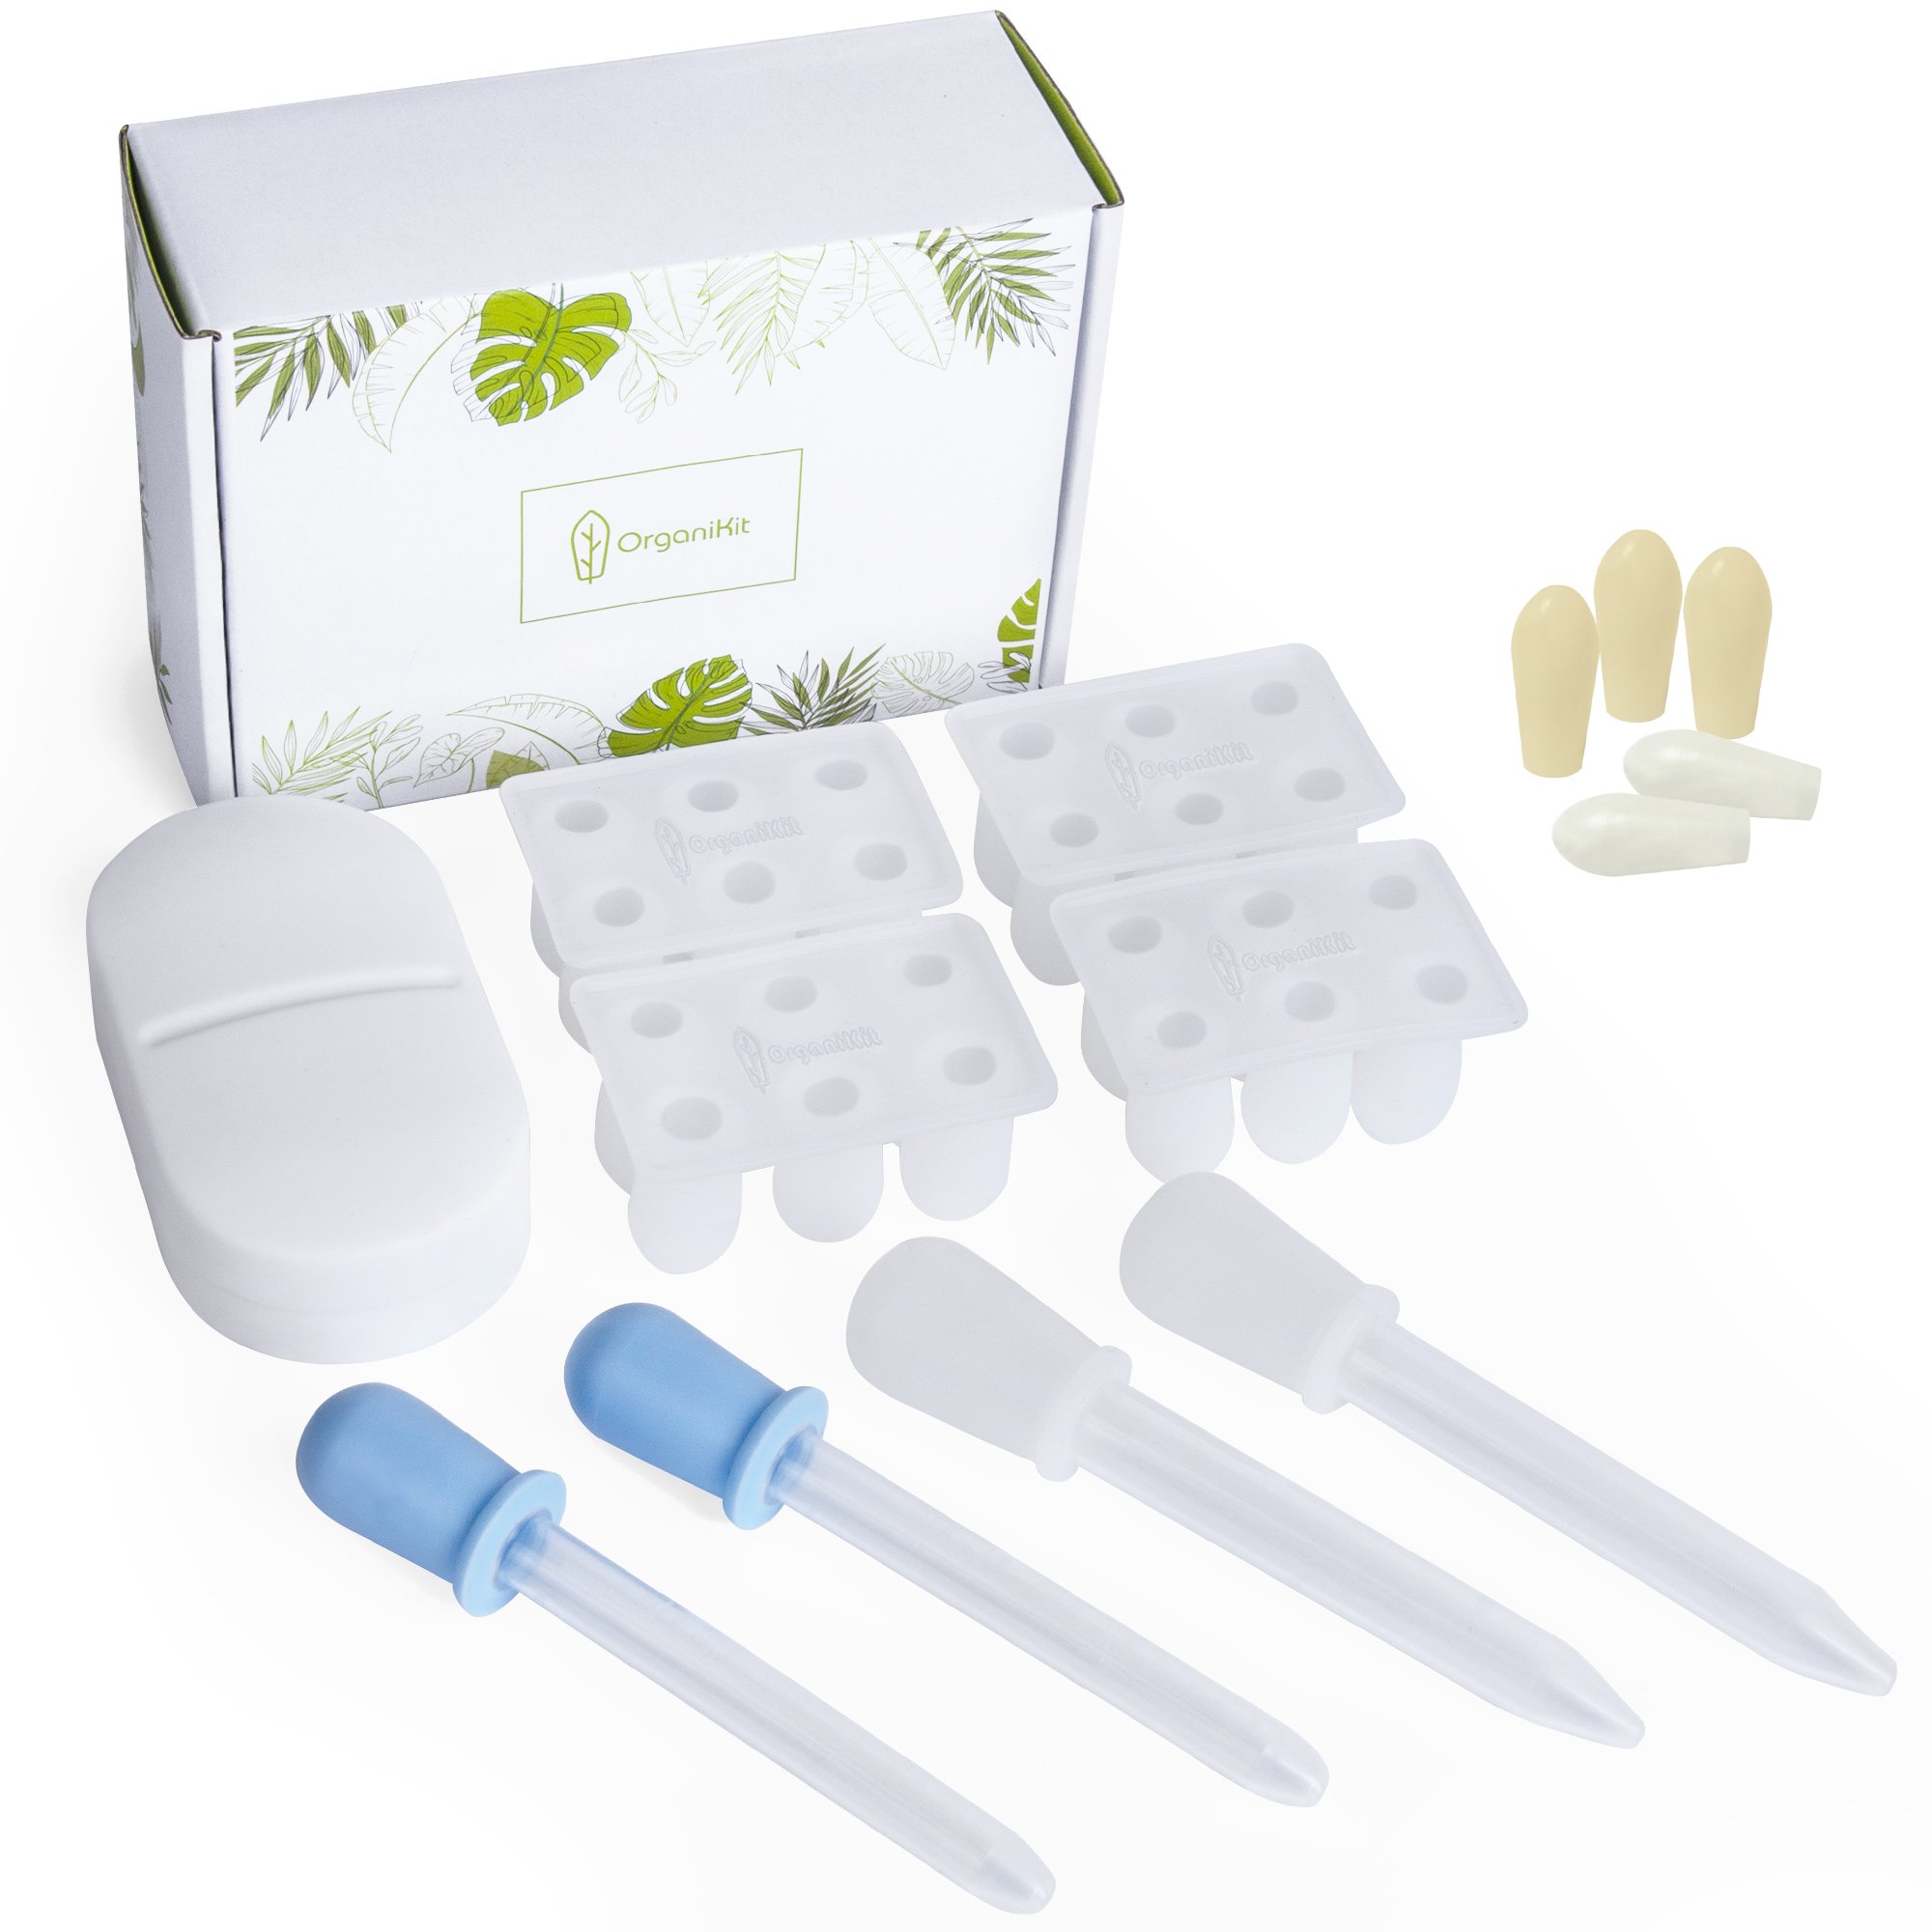 Image of Suppository Molding Kit by OrganiKit